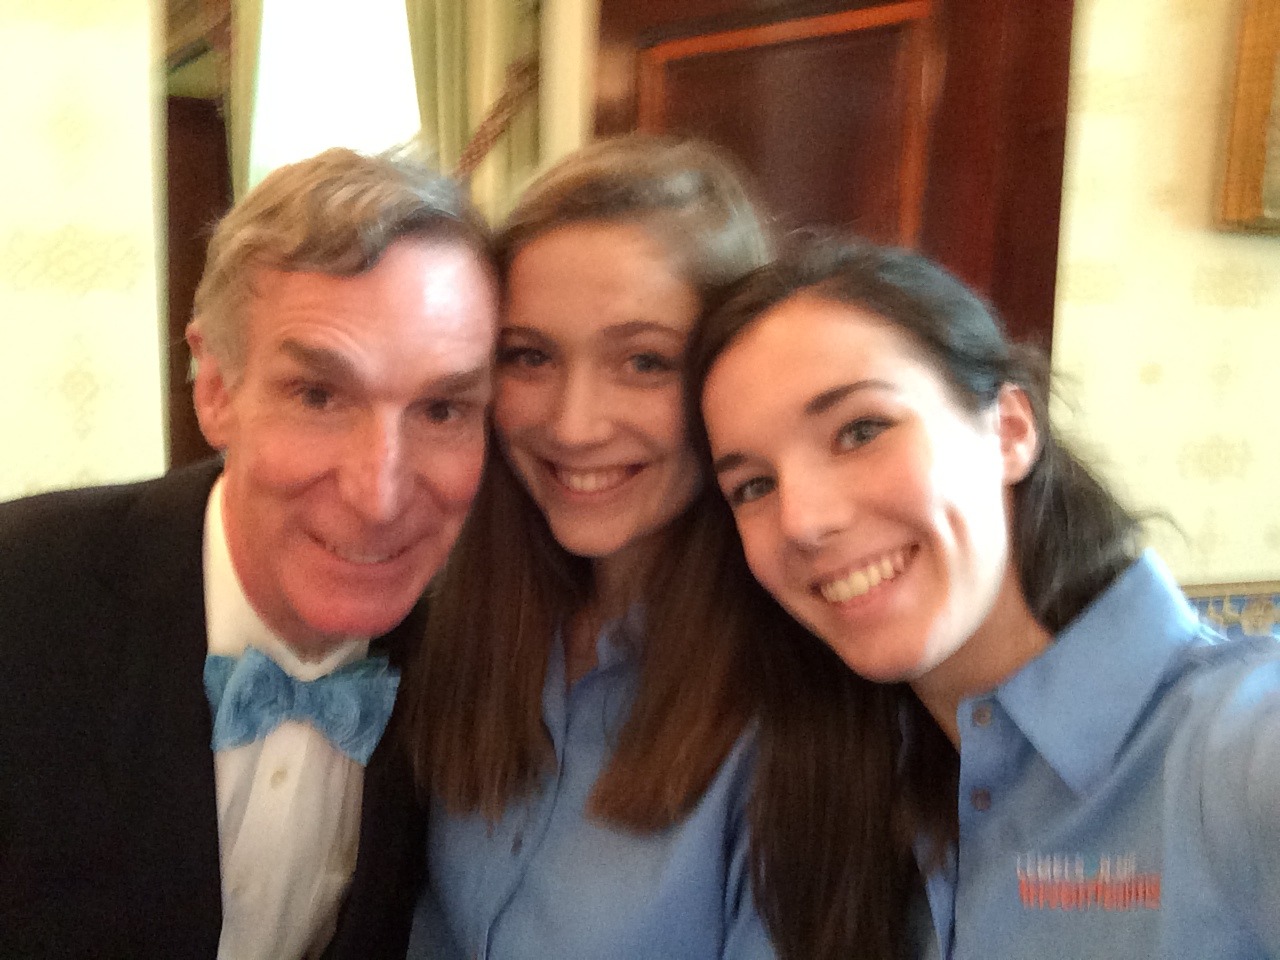 OH AND I GOT A SELFIE WITH BILL NYE THE SCIENCE GUY